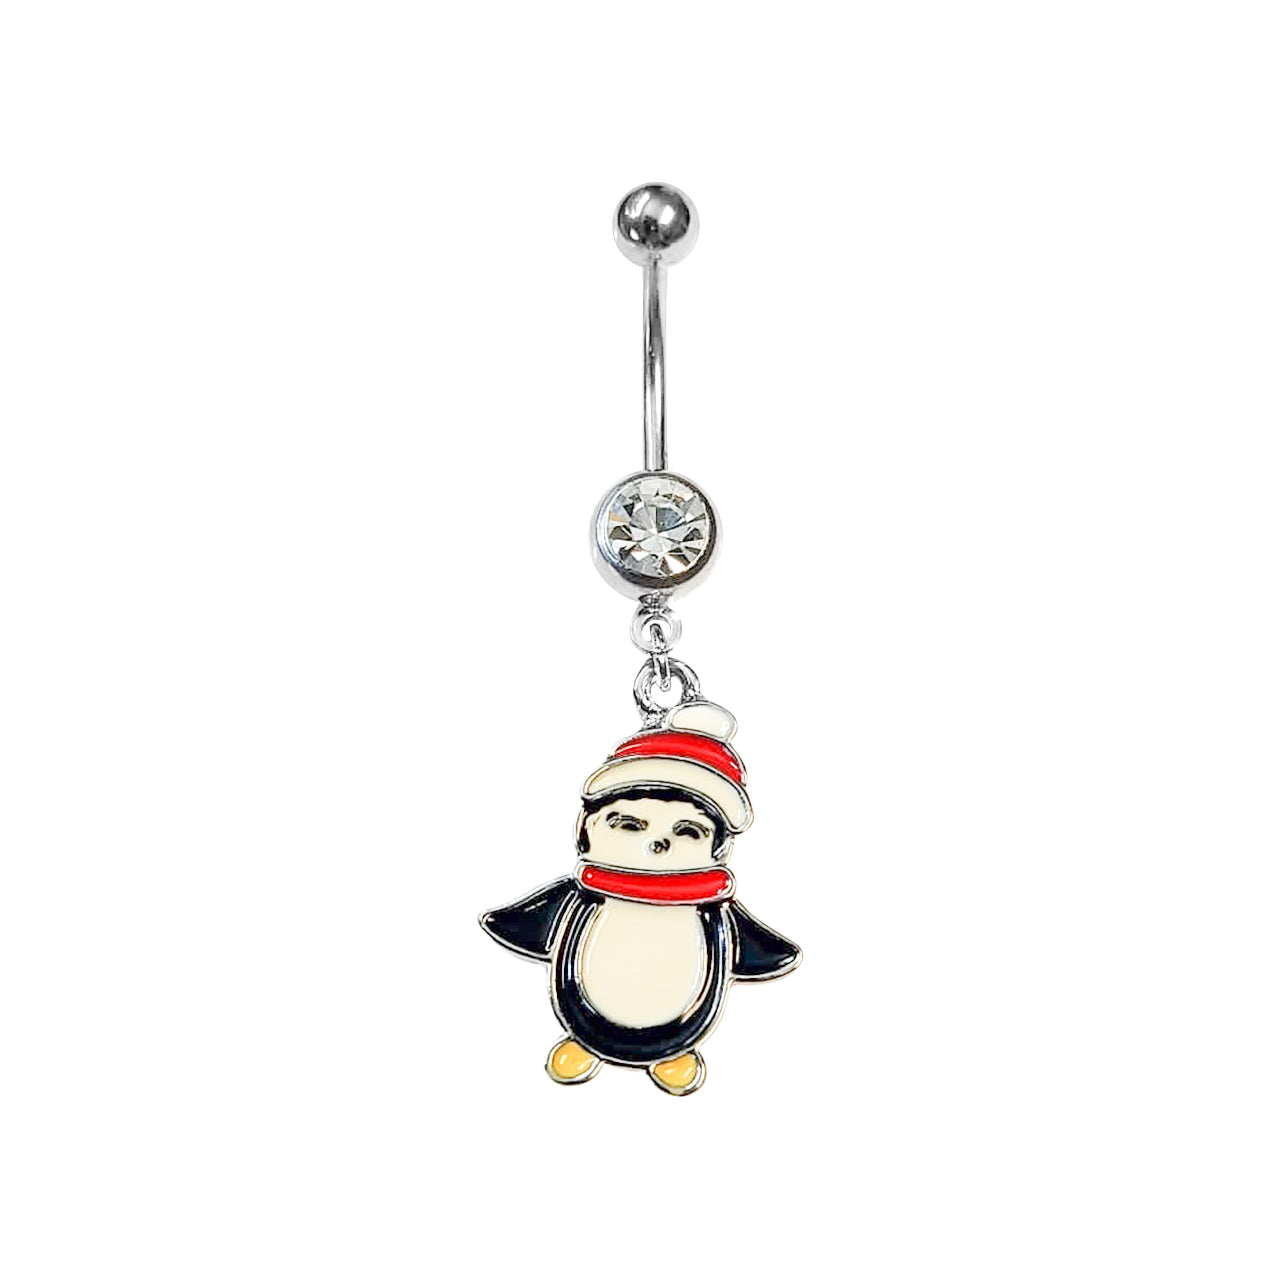 4 Belly Ring Pack + Holiday Gift Box - Santa Snowman Penguin Wreath